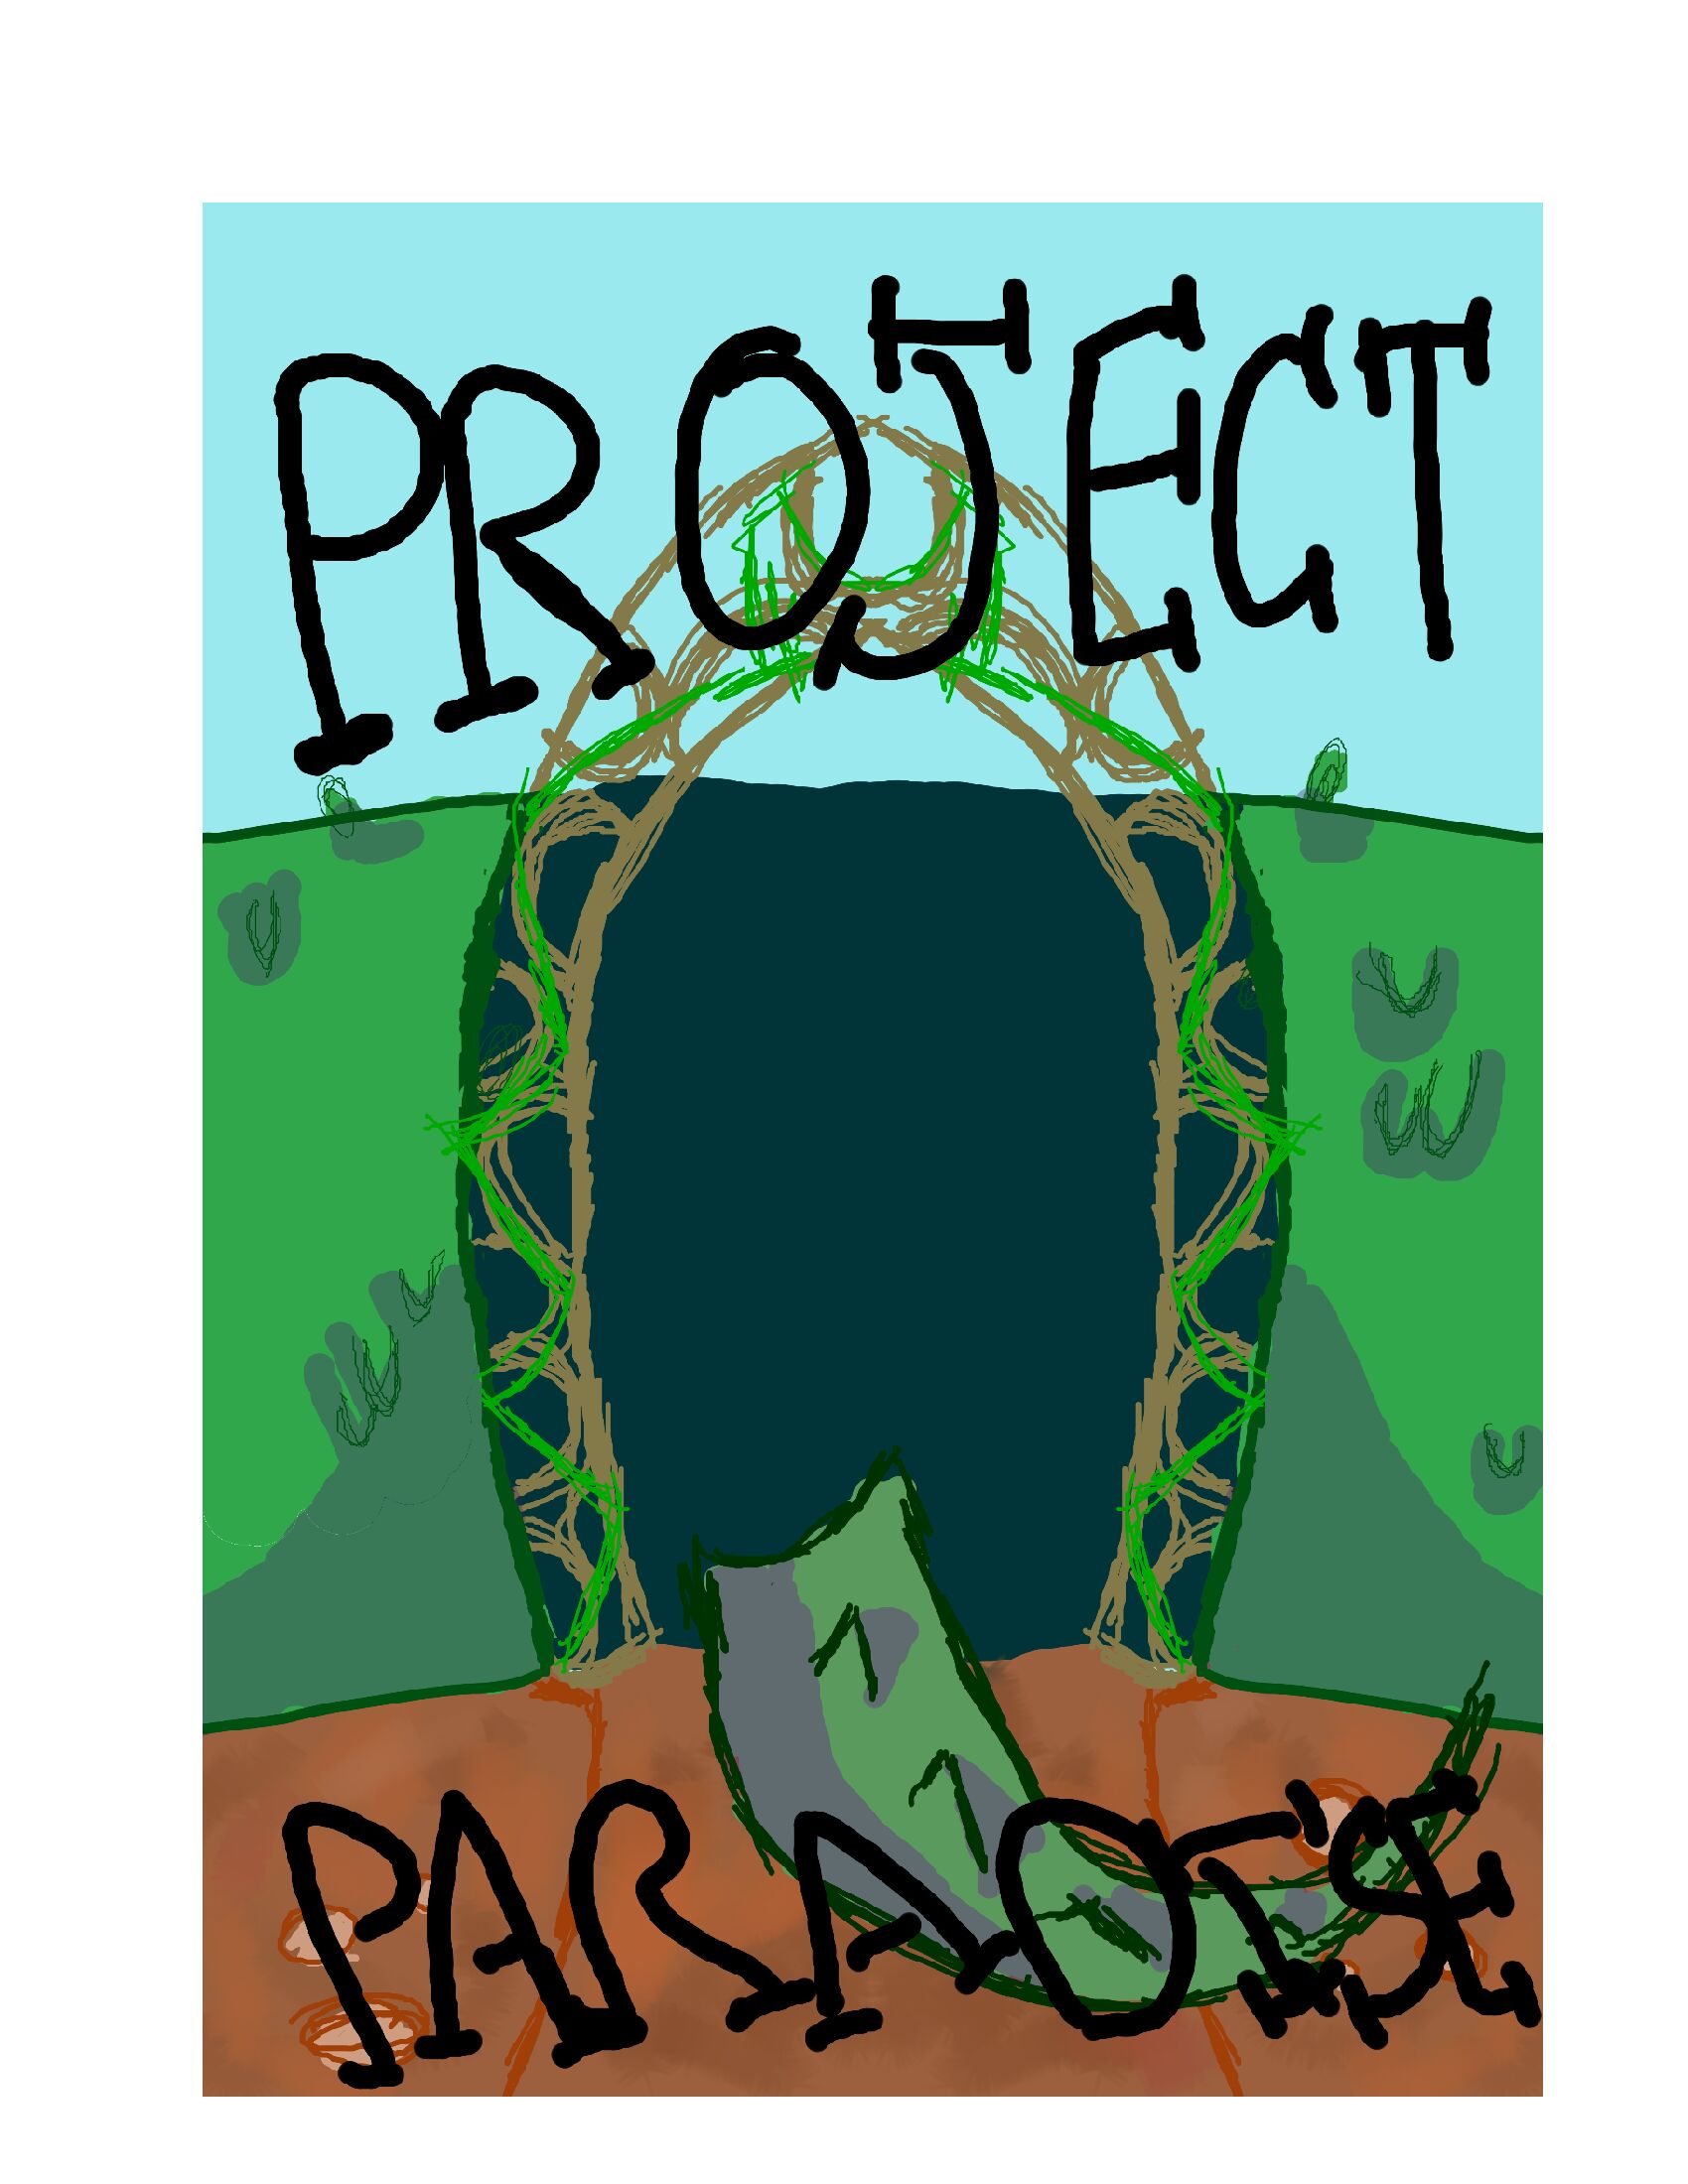 Project Paradise